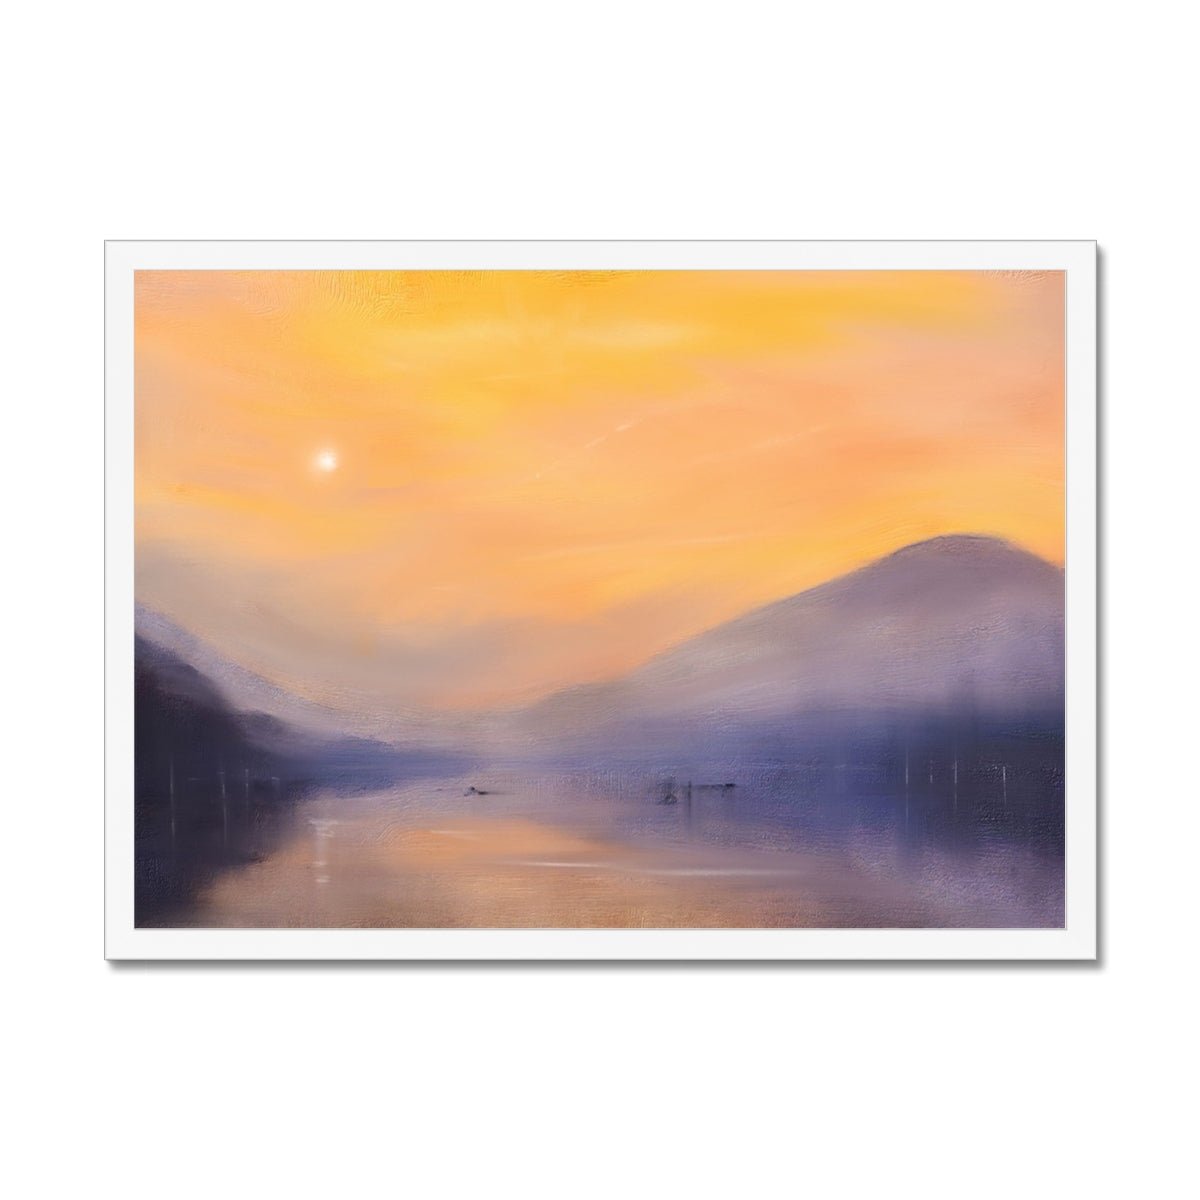 Loch Eck Dusk Painting | Framed Prints From Scotland-Framed Prints-Scottish Lochs & Mountains Art Gallery-A2 Landscape-White Frame-Paintings, Prints, Homeware, Art Gifts From Scotland By Scottish Artist Kevin Hunter